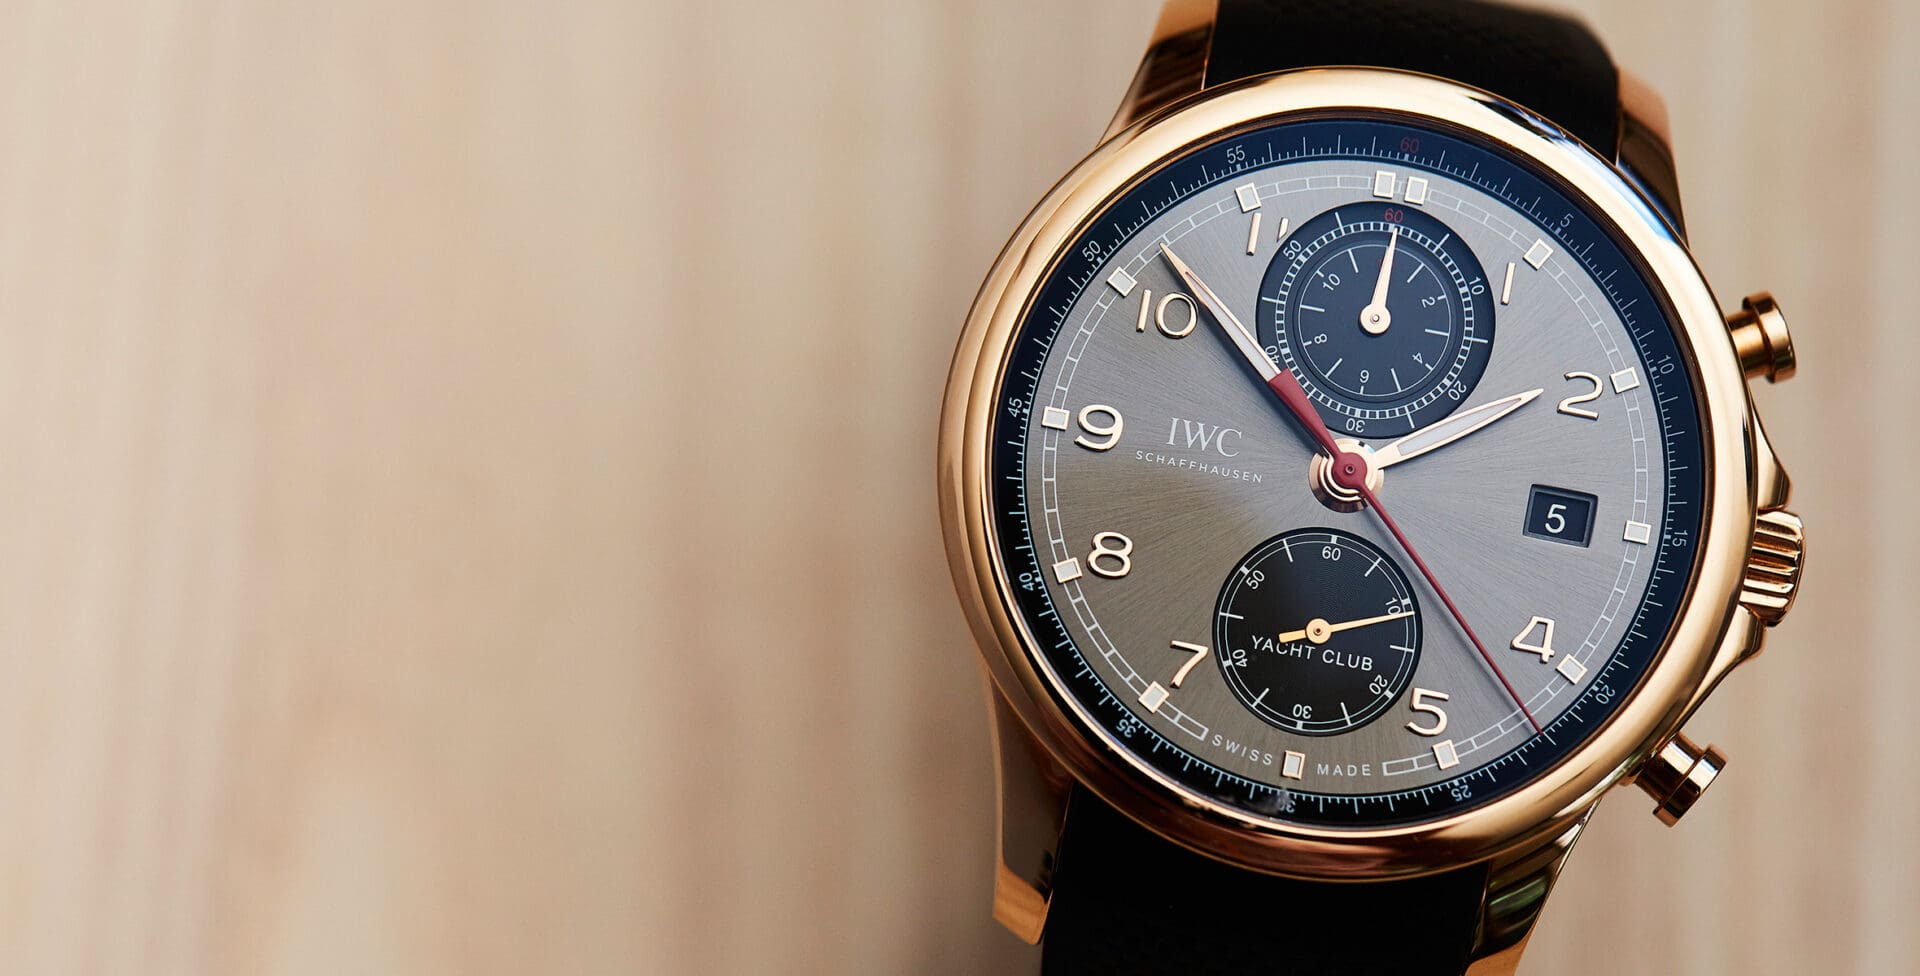 IN-DEPTH: Perfectly suited to summer – the IWC Portugieser Yacht Club Chronograph